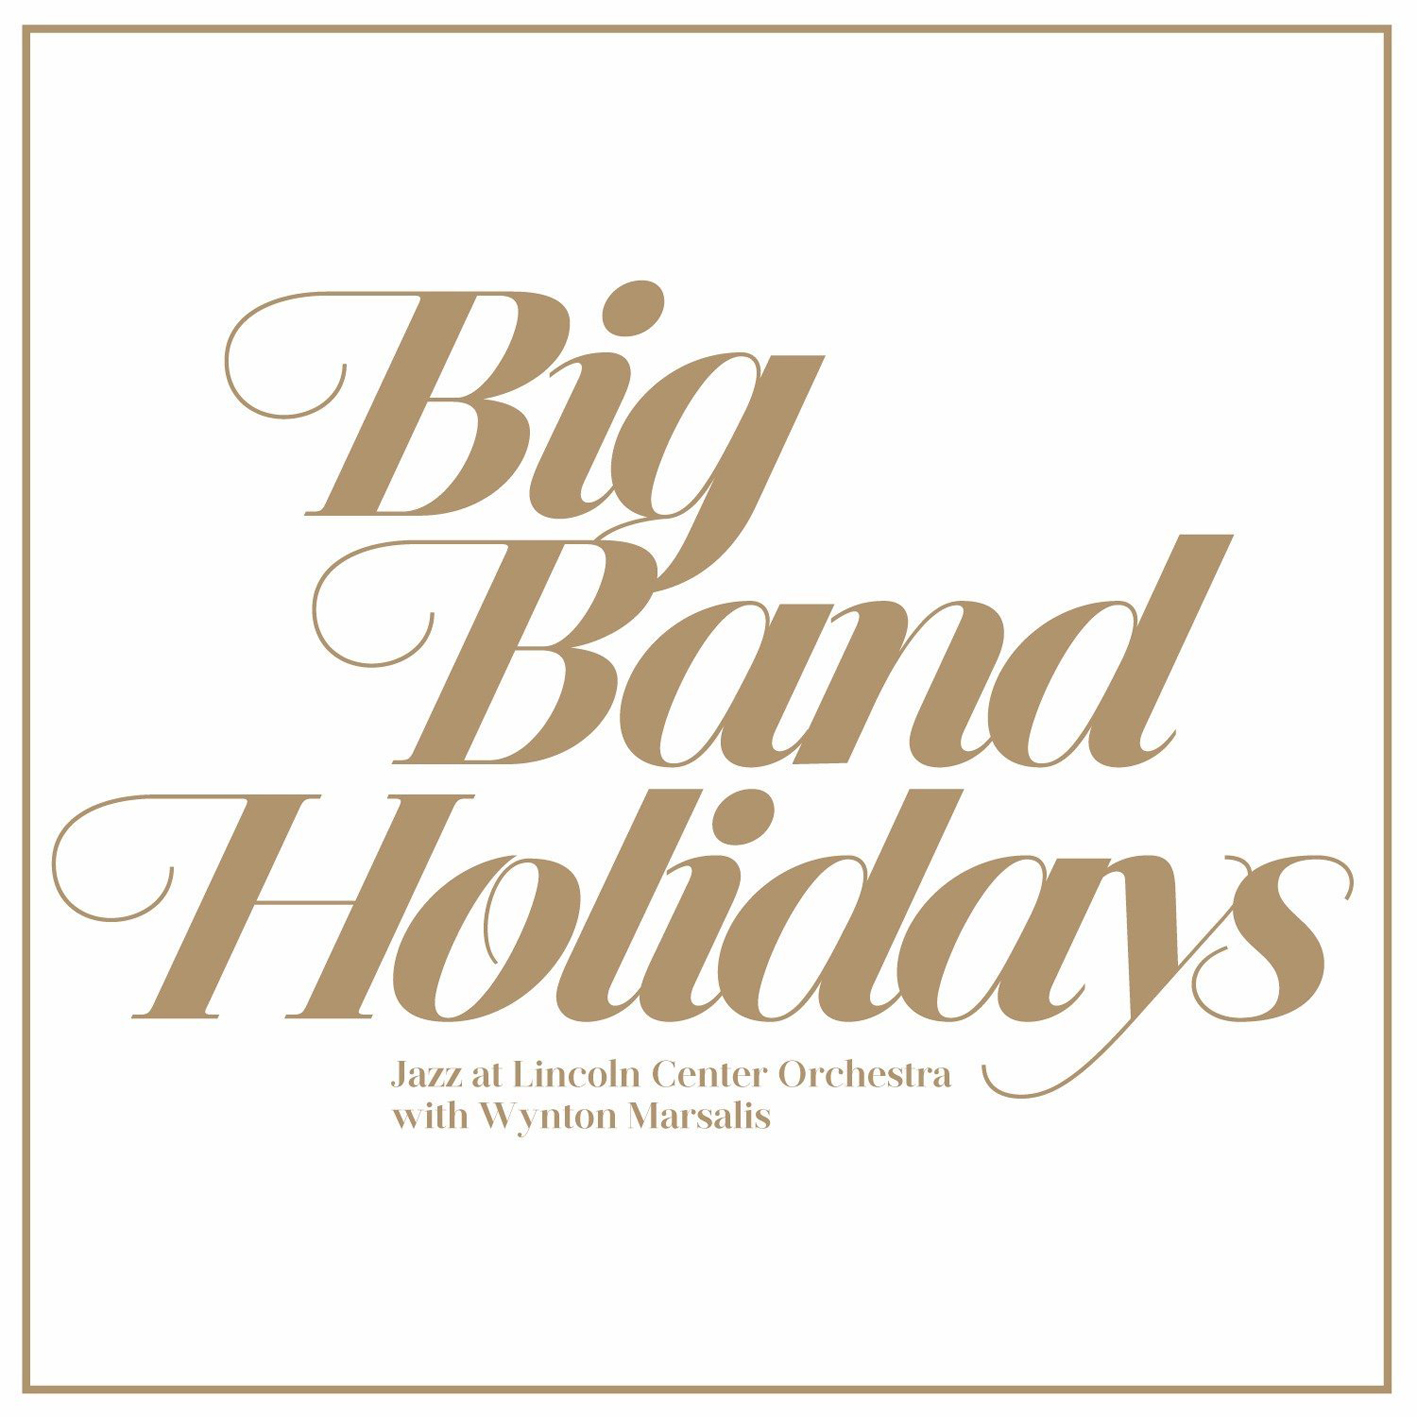 Jazz At Lincoln Center Orchestra with Wynton Marsalis - Big Band Holidays (2015) [HDTracks FLAC 24bit/96kHz]